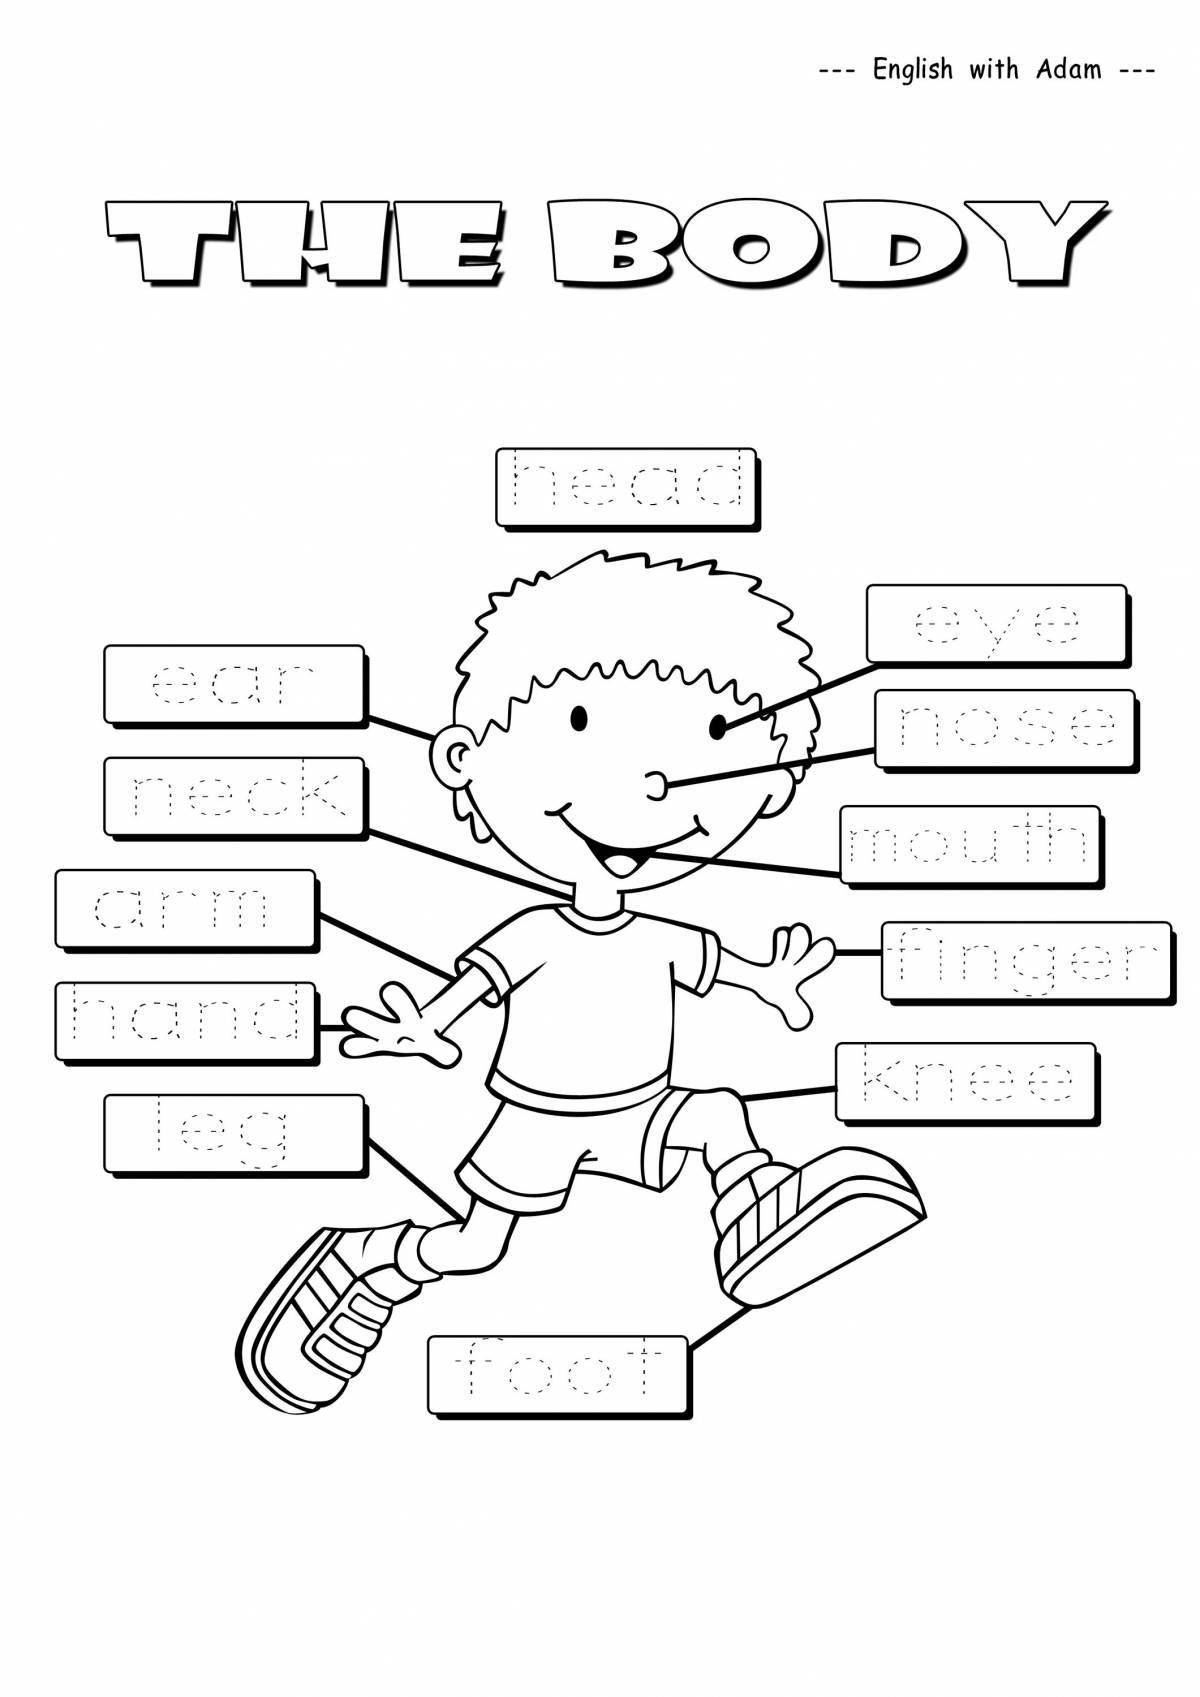 Body parts in english for kids #7